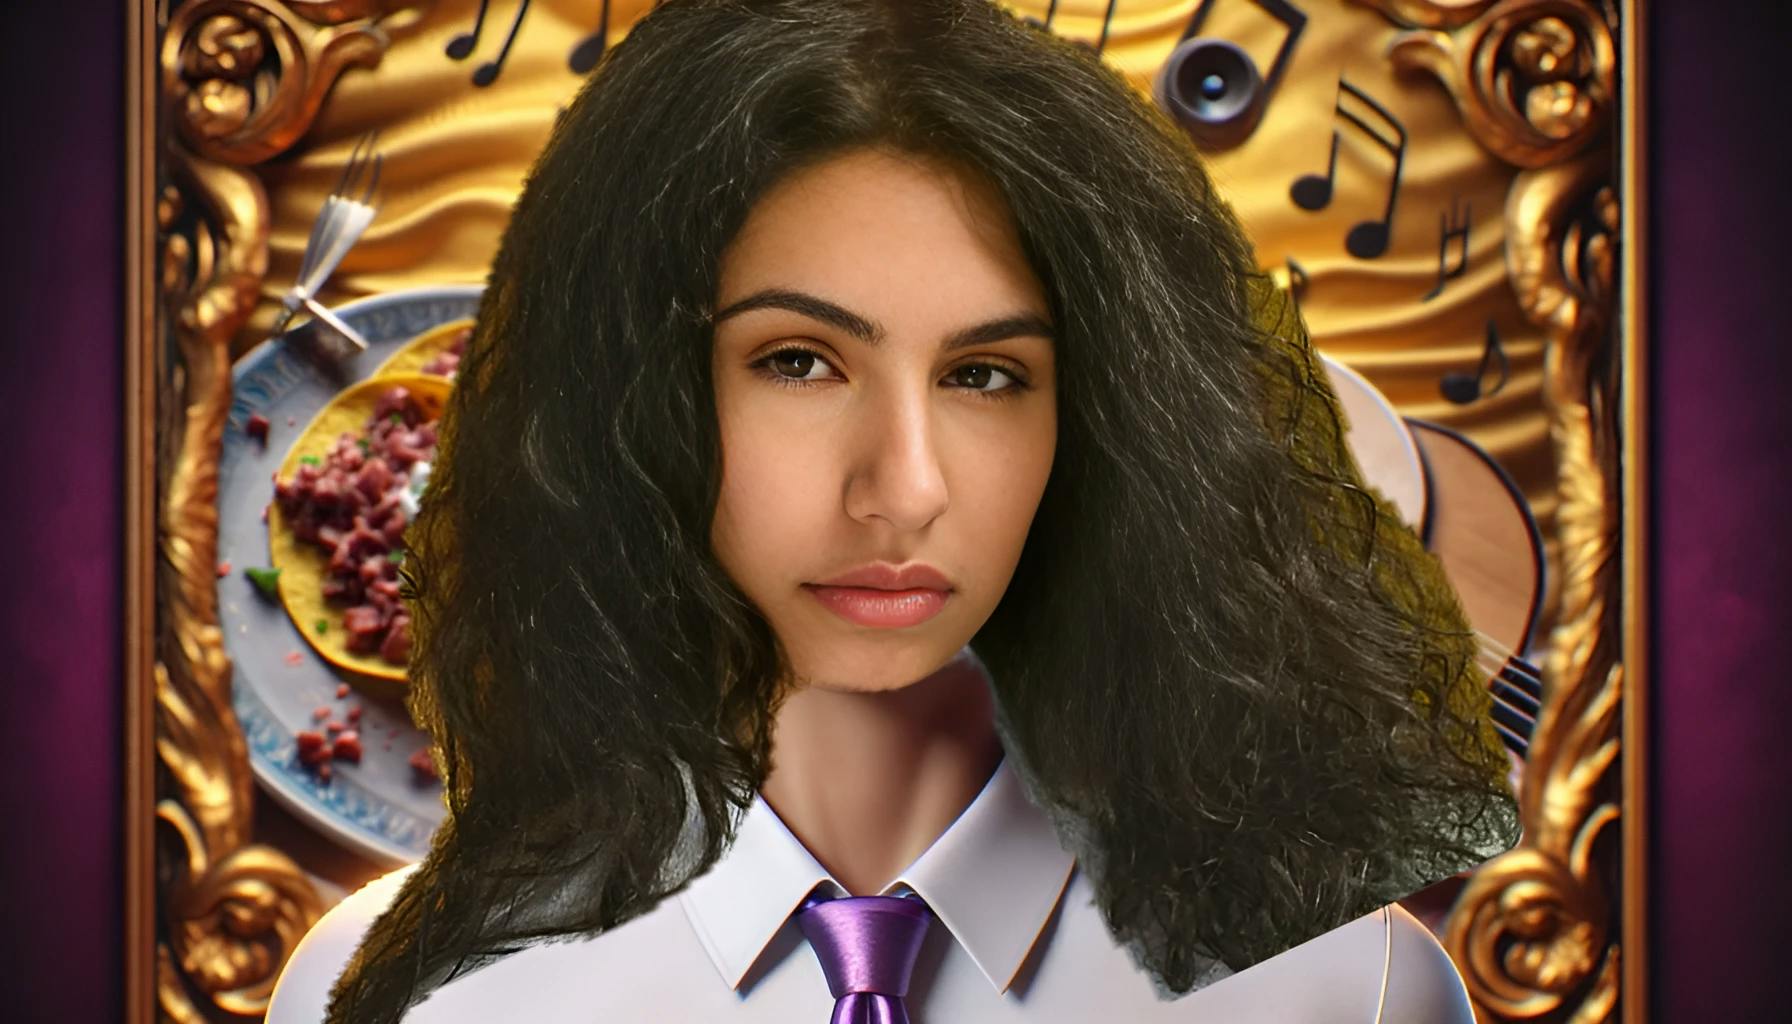 alessia-cara-musical-reflection-and-culinary-taste.webp